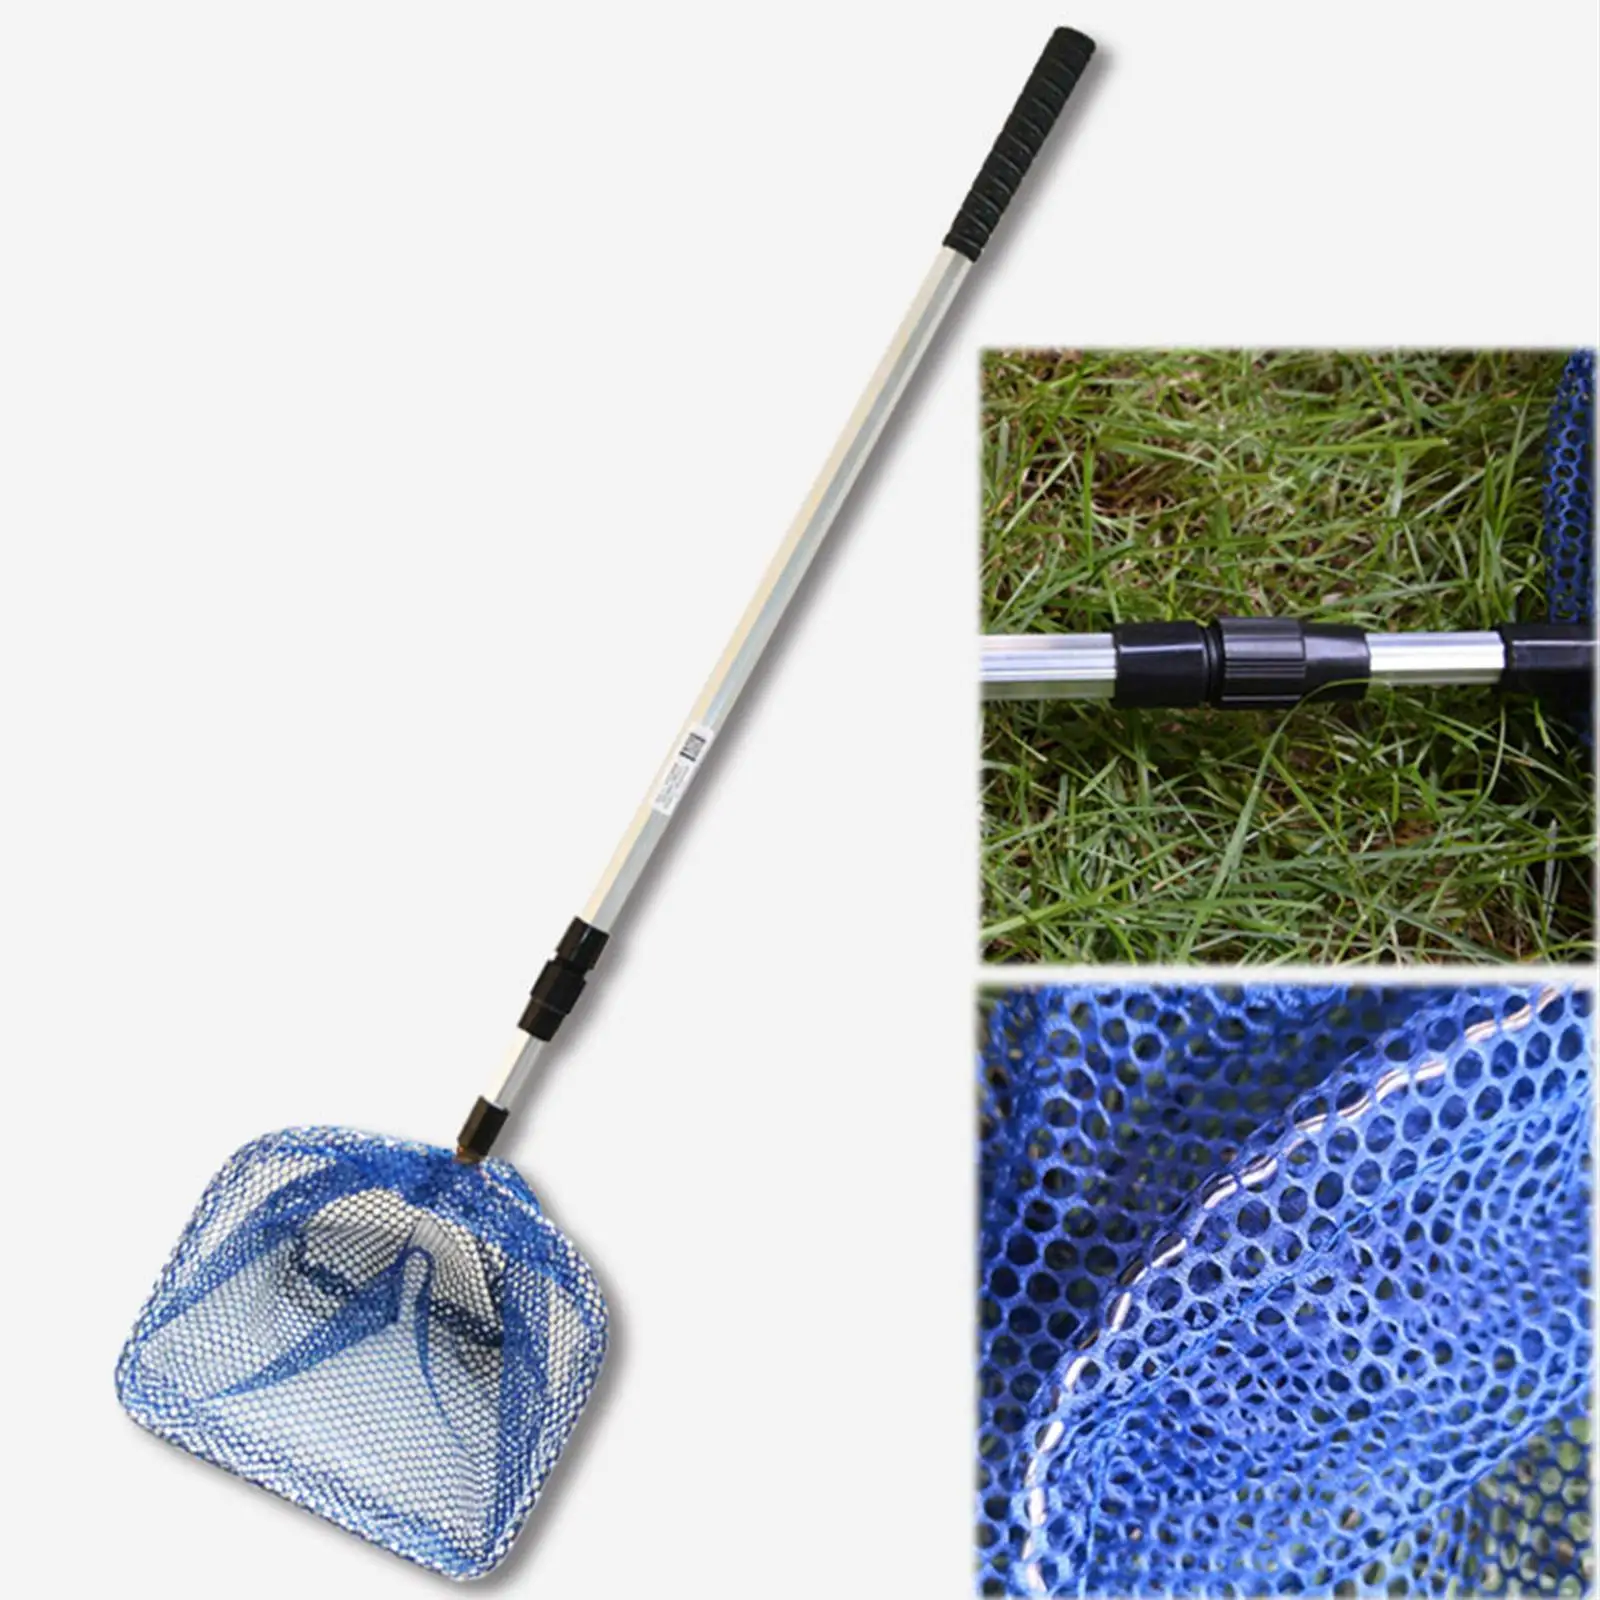 Pinger Pinggong Picker Telescopic Accessory Net Pickup Collector Bag Collectible Net for Collecting Ball